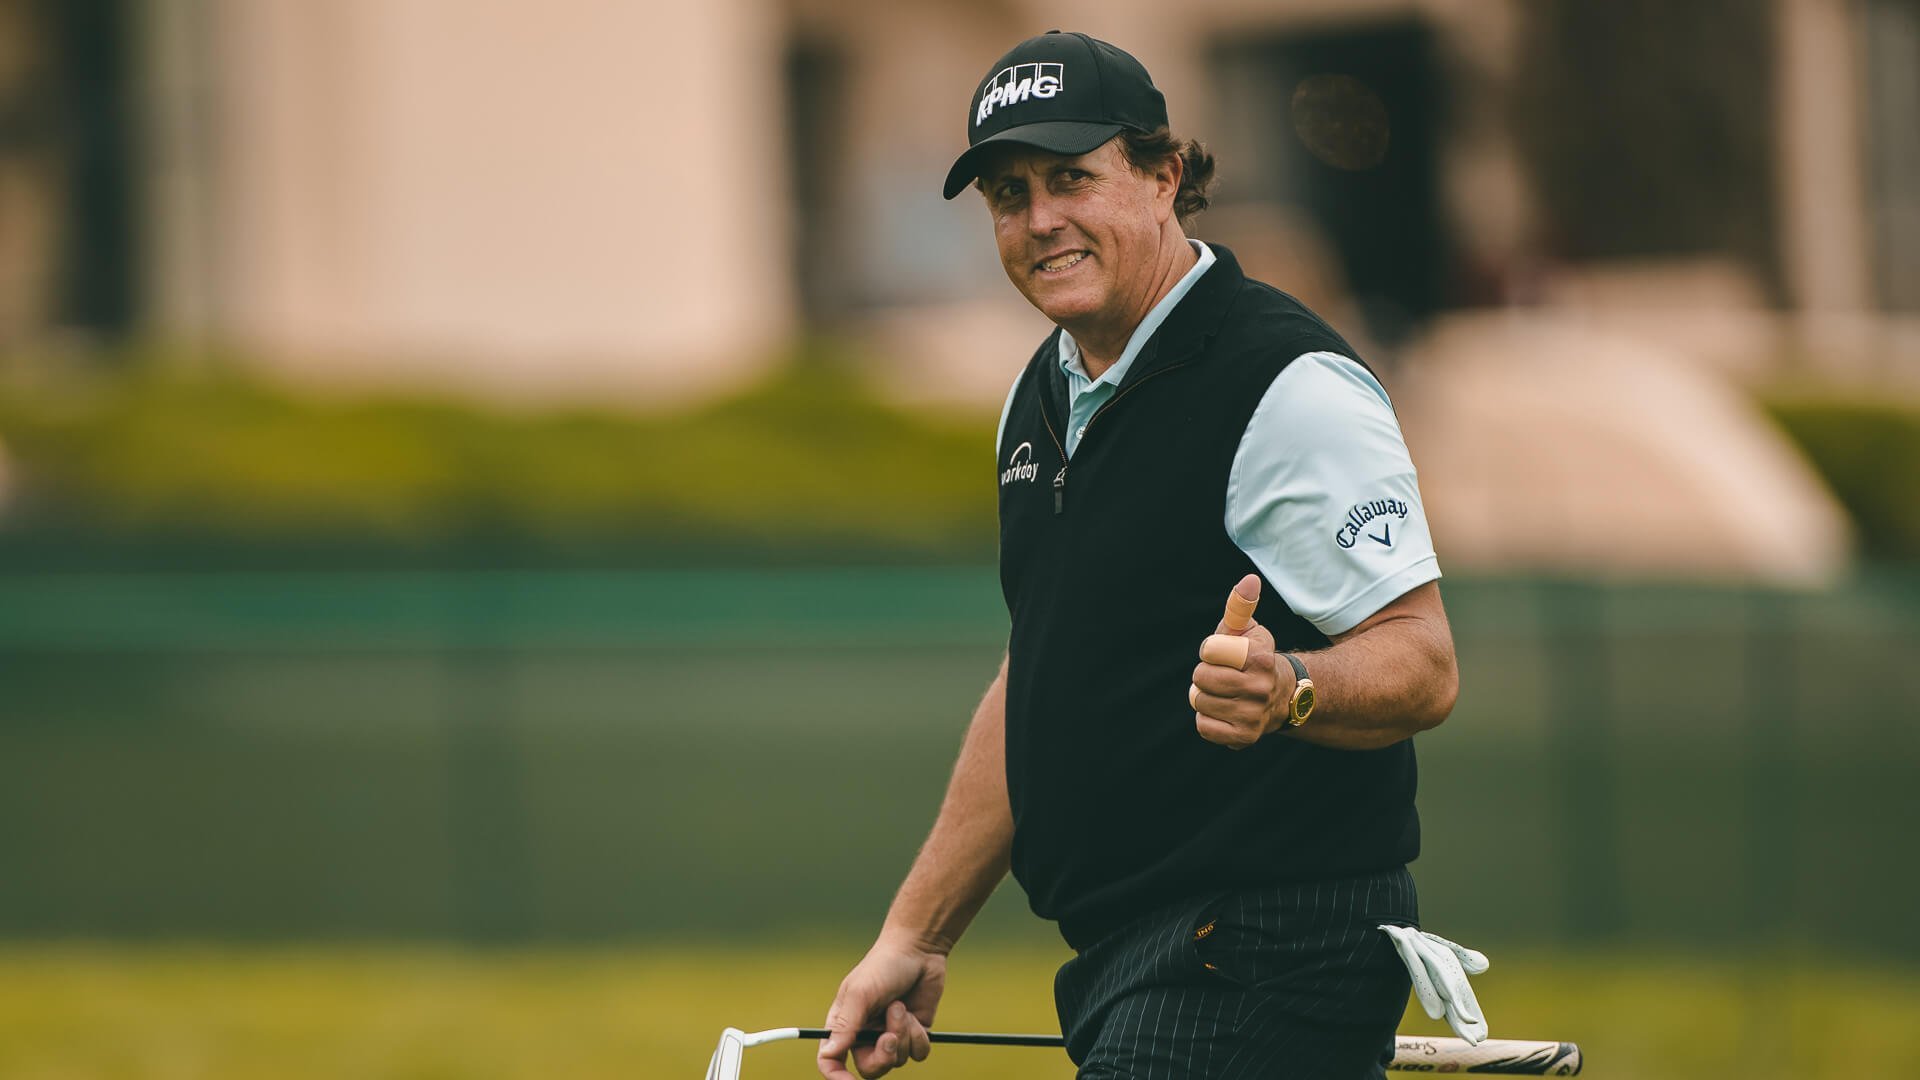 Phil Mickelson, Rory Mcllroy and other pro golfers' net worths